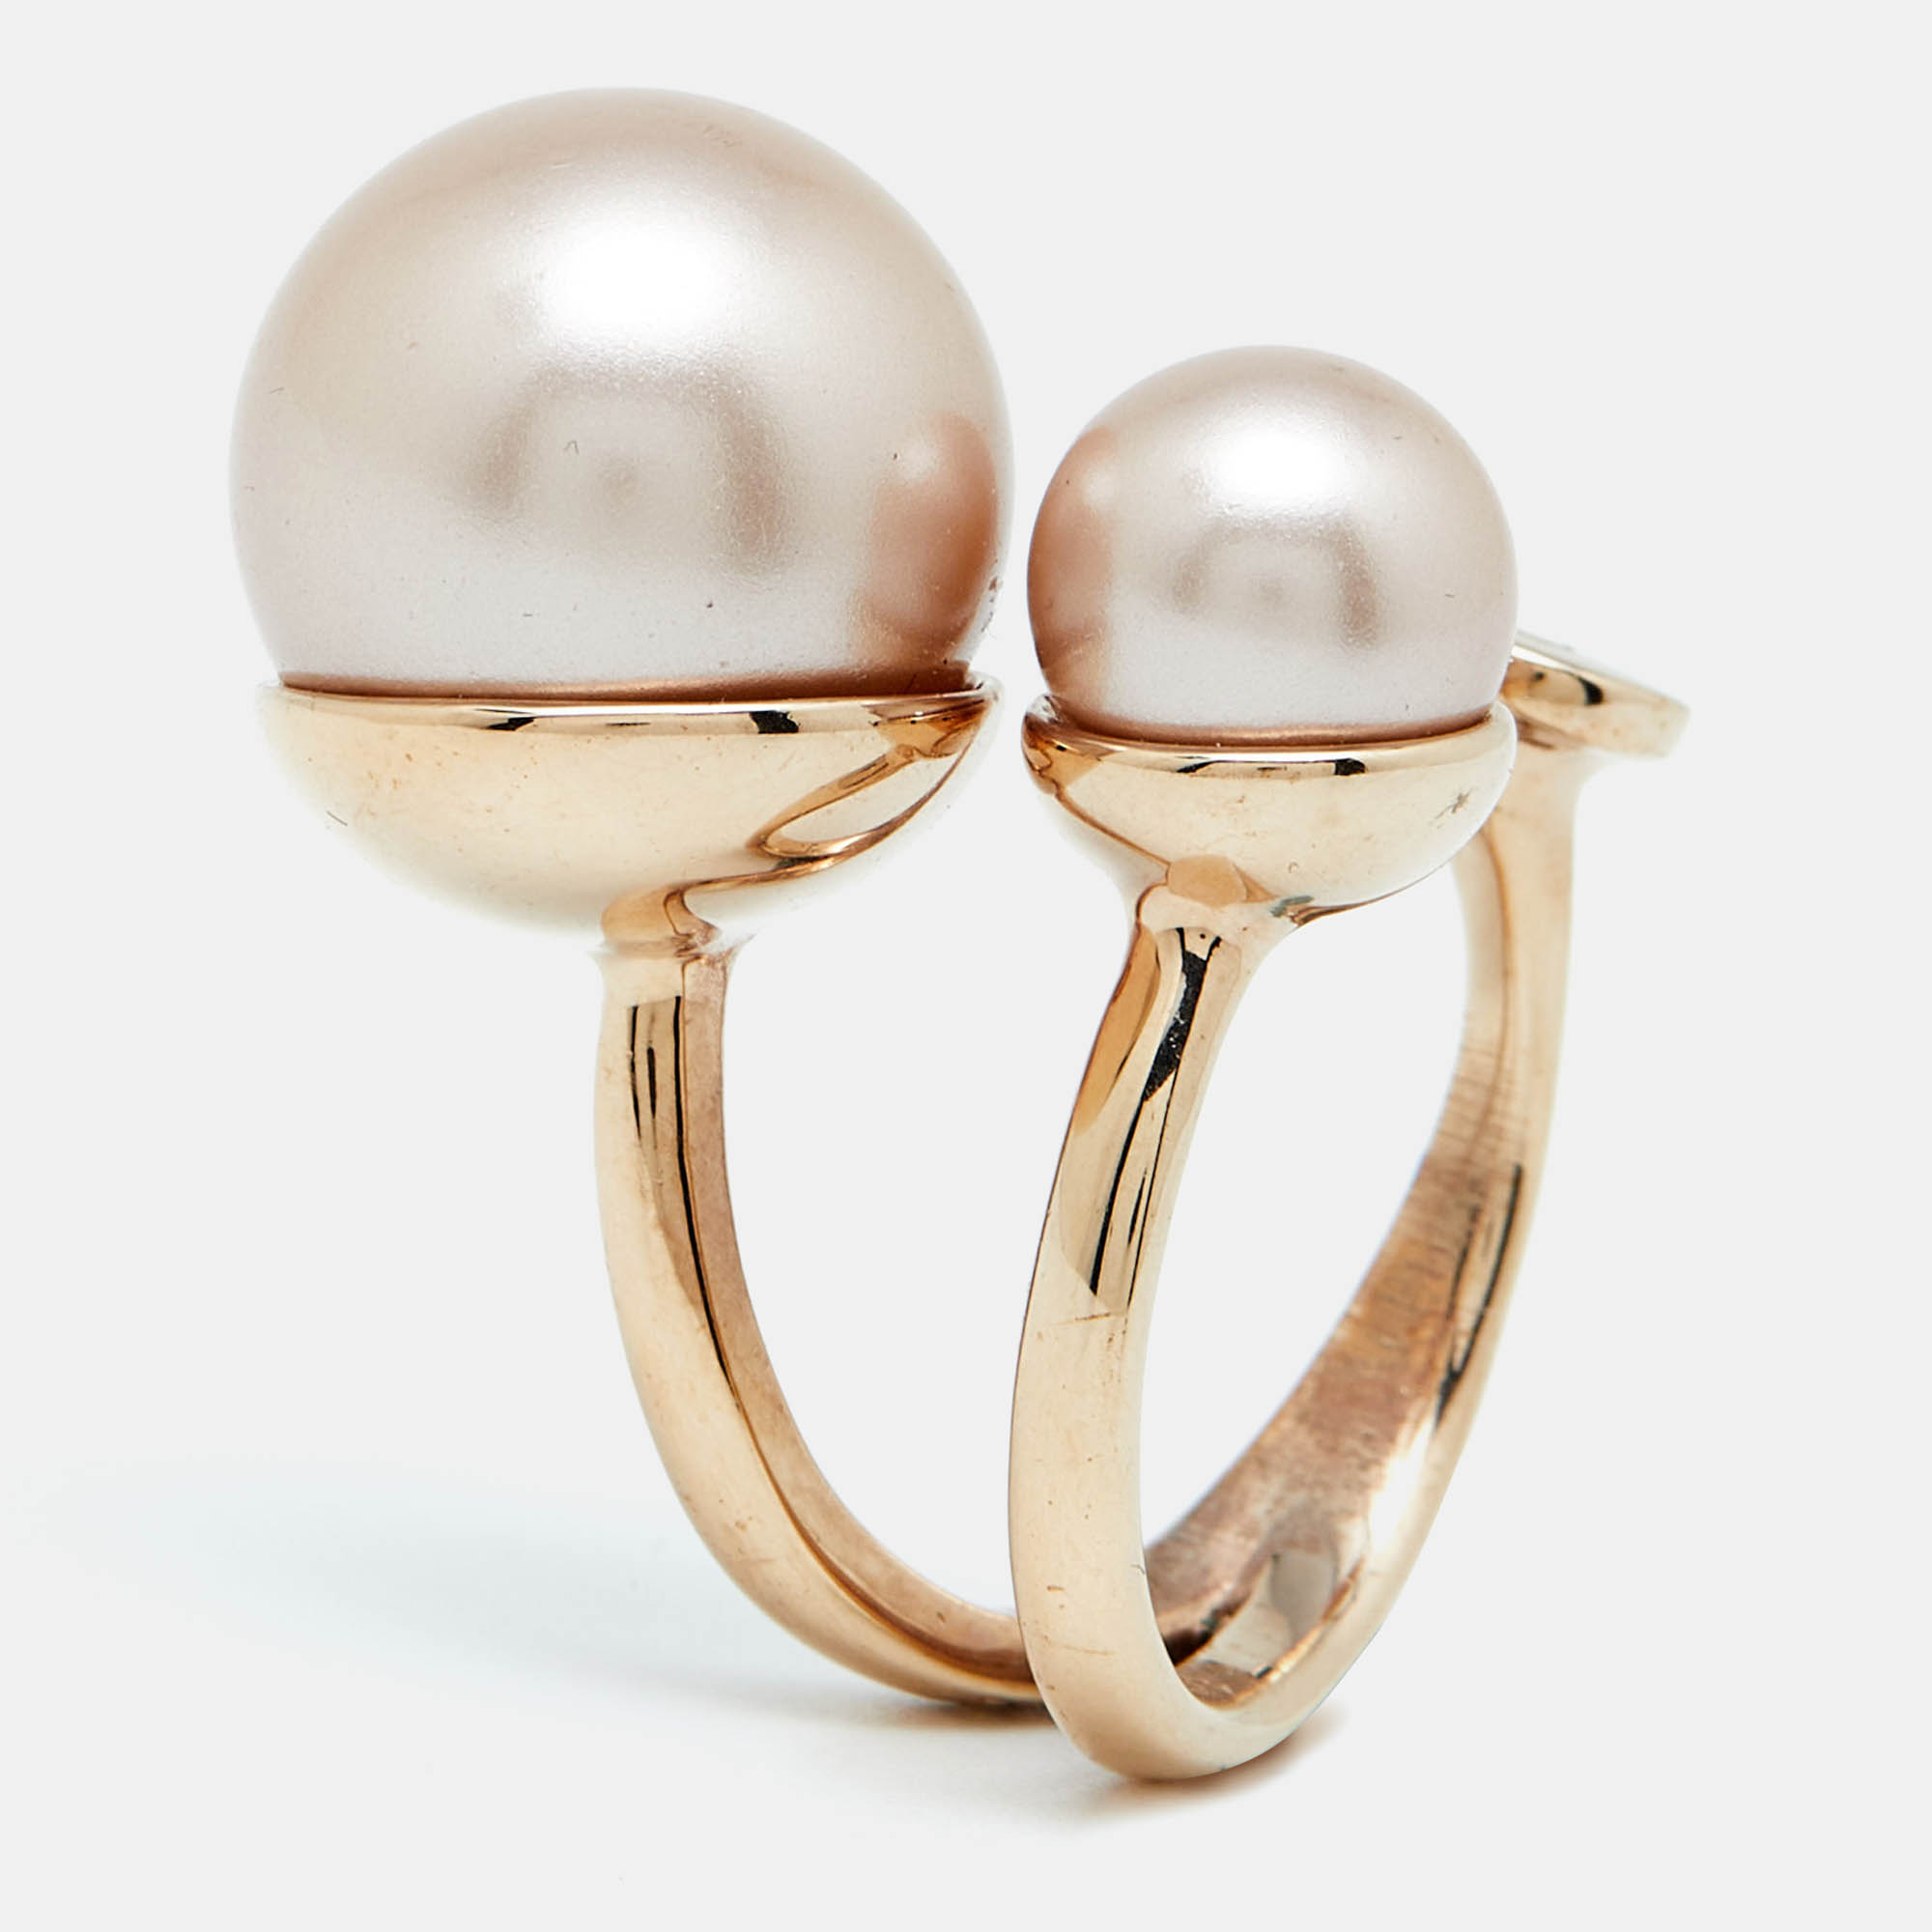 Dior ultradior faux pearl gold tone cocktail ring size 56